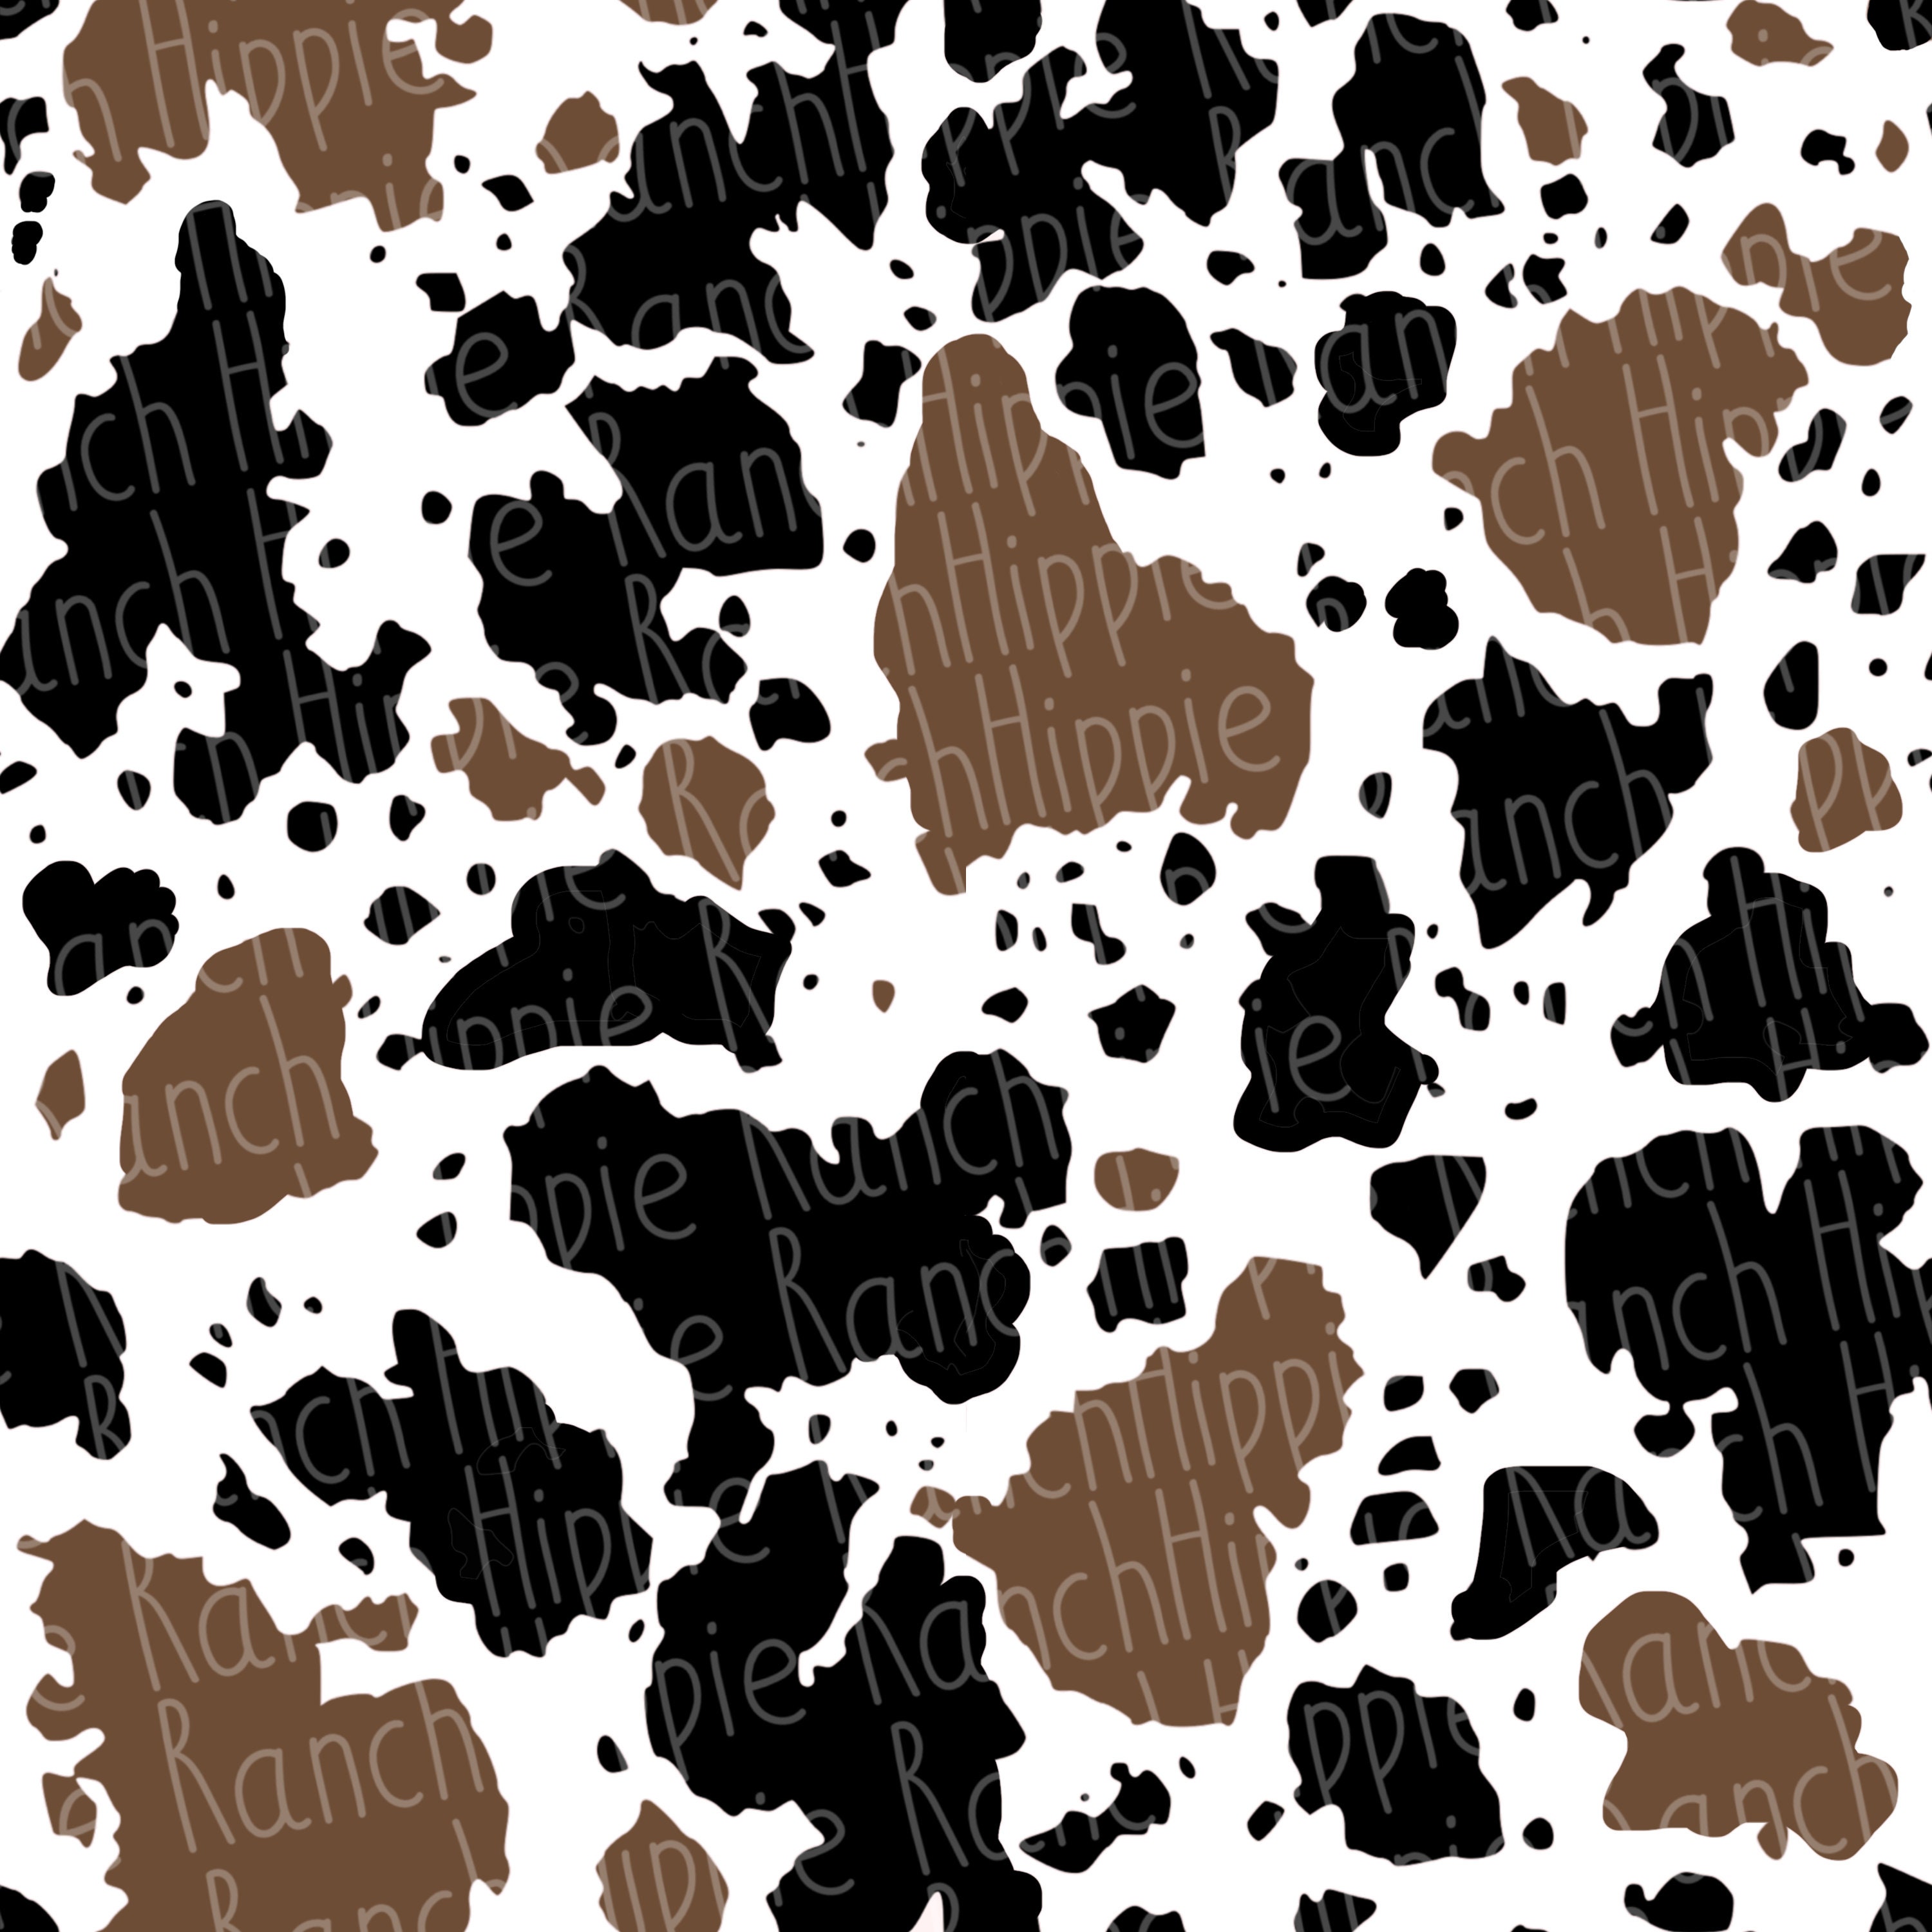  Manfei Cow Print Fabric by The Yard, Brown White Cow Fur Print  Fabric for Craft Lovers and Sewing Hobby, Abstract Cowhide Print Decorative  Fabric for for Upholstery and Home DIY Projects